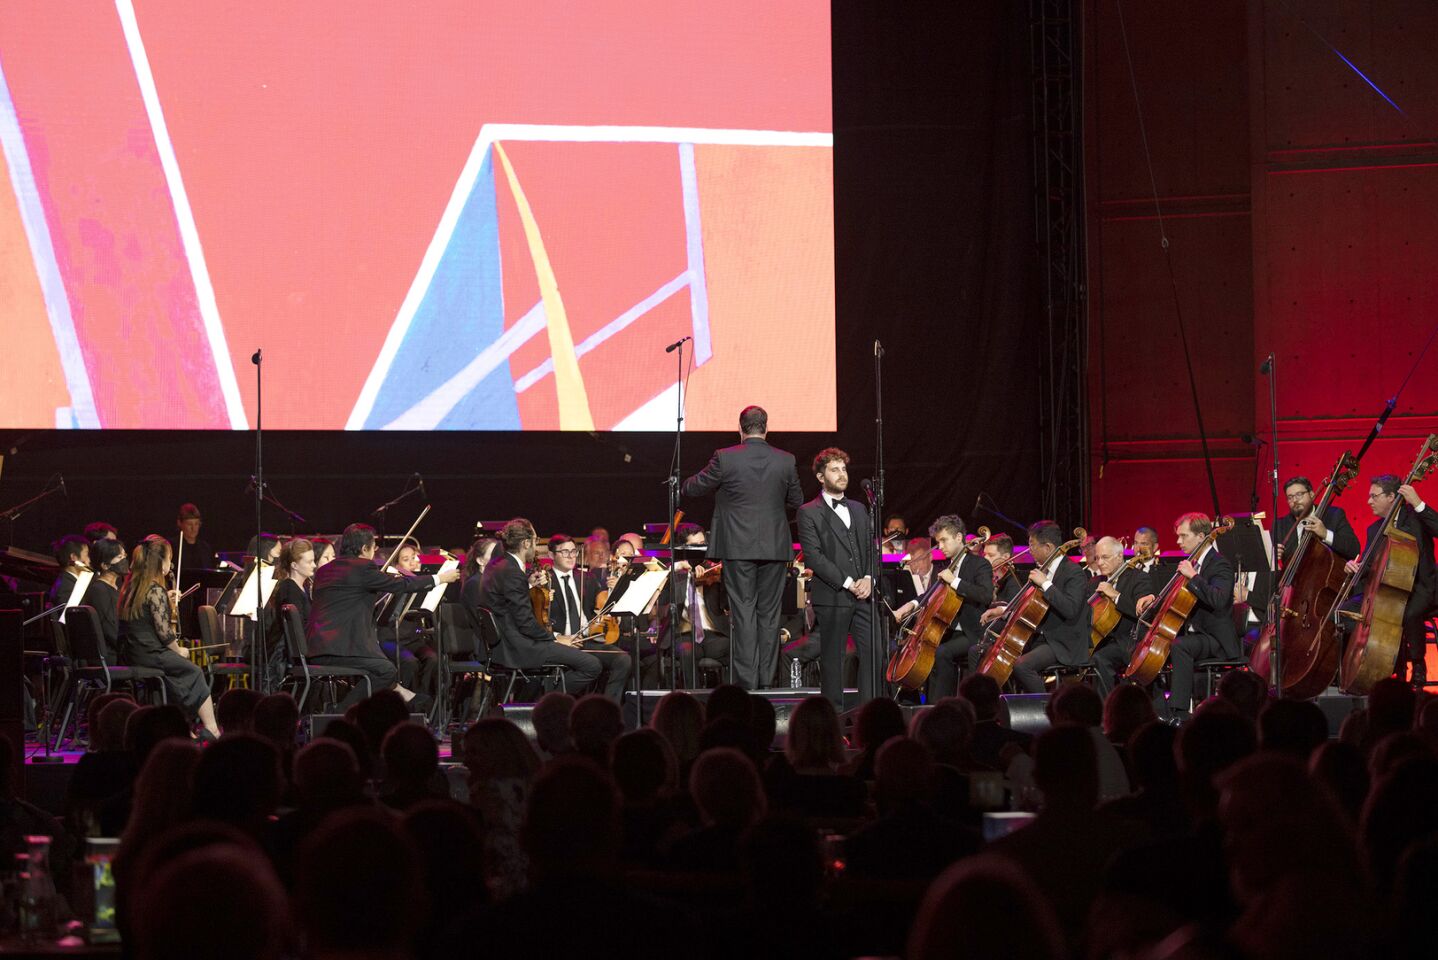 Conductor Sean O'Loughlin, Broadway actor Ben Platt, and the San Diego Symphony Orchestra perform at the Salk Institute